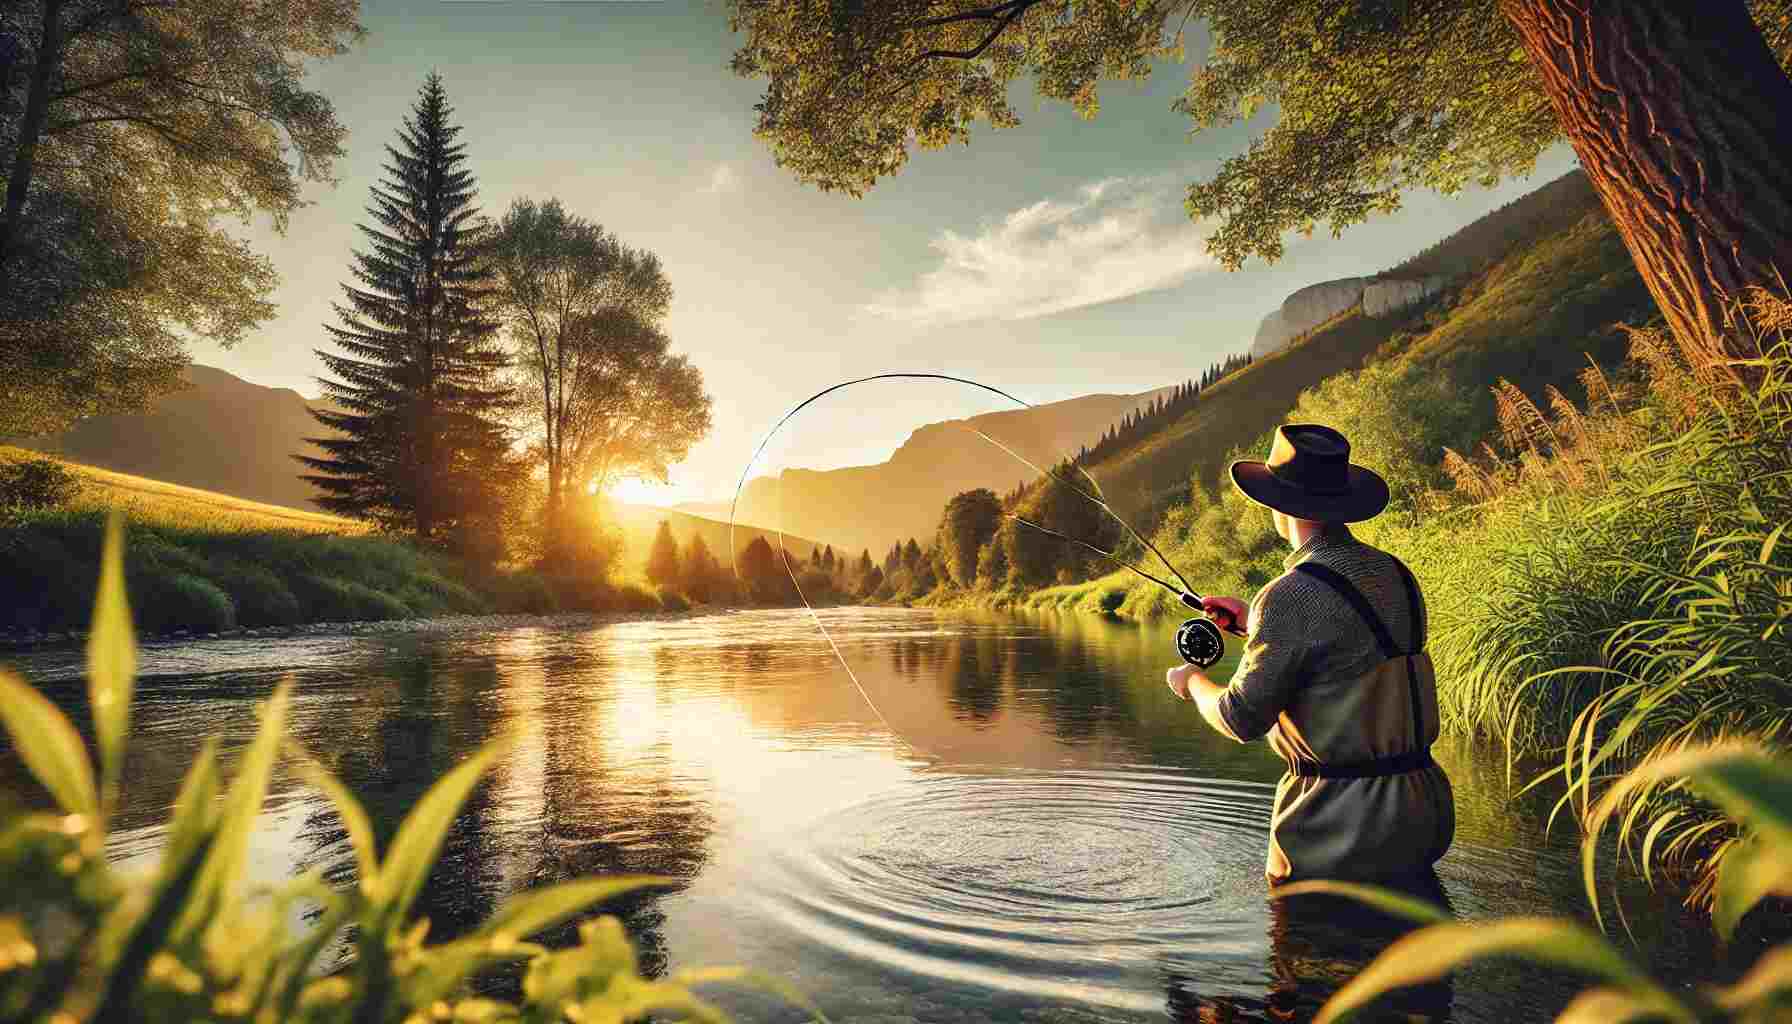 Serene summer scene of a clear river with lush greenery and mountains in the background. An angler wearing a hat and waders casts a fly fishing line into the water under a clear sky with a golden sunset reflecting on the water